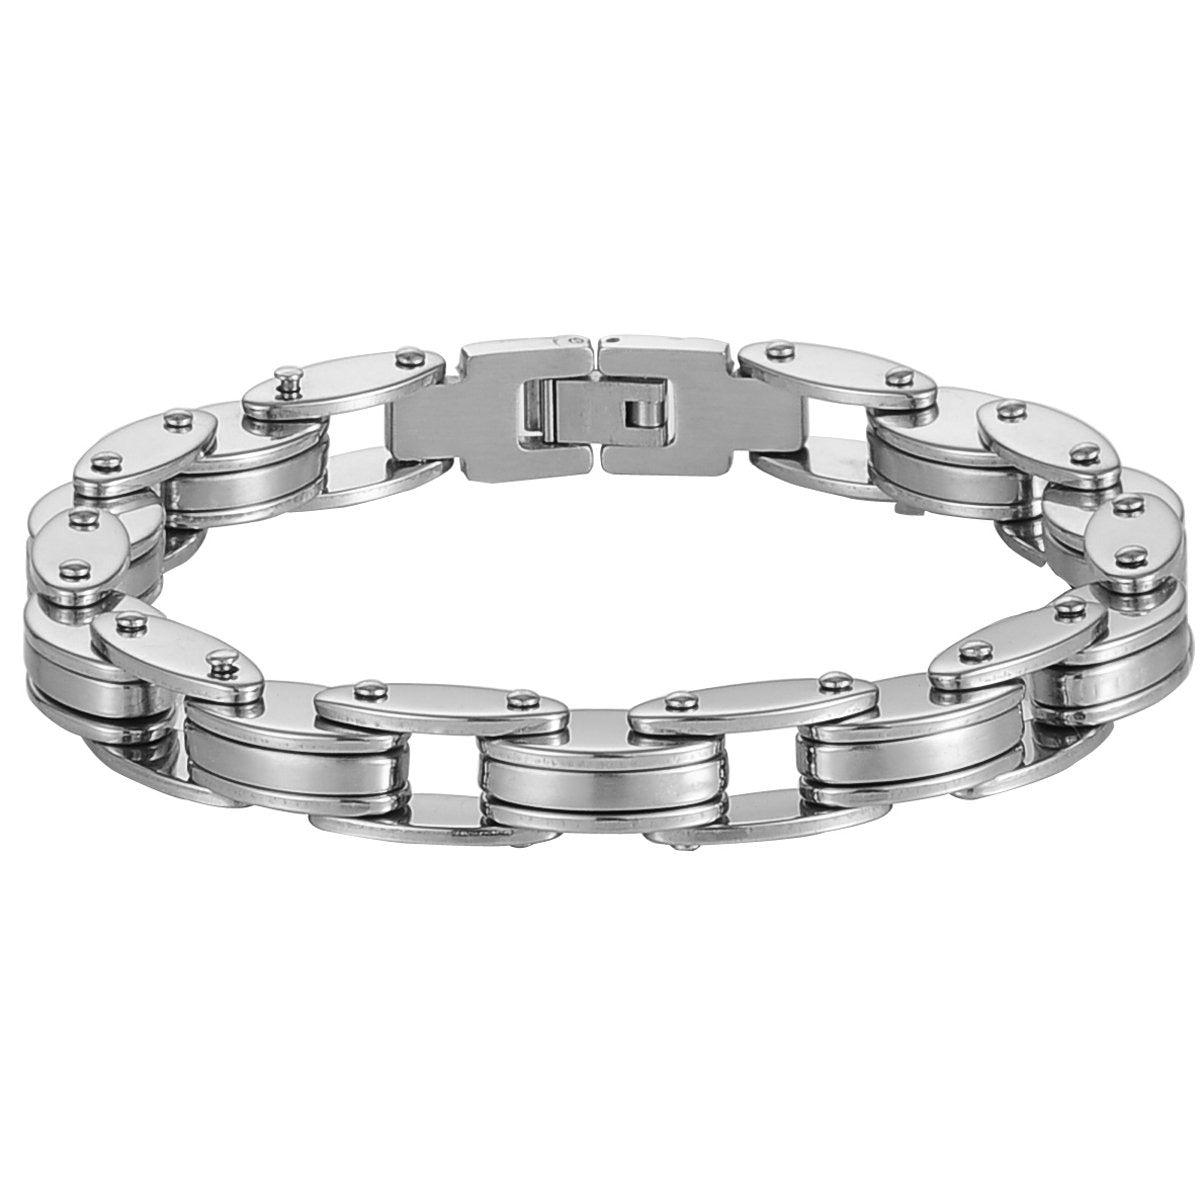 M|M Stainless Bracelet Assortment - Jewelry - Mad Man by Mad Style Wholesale